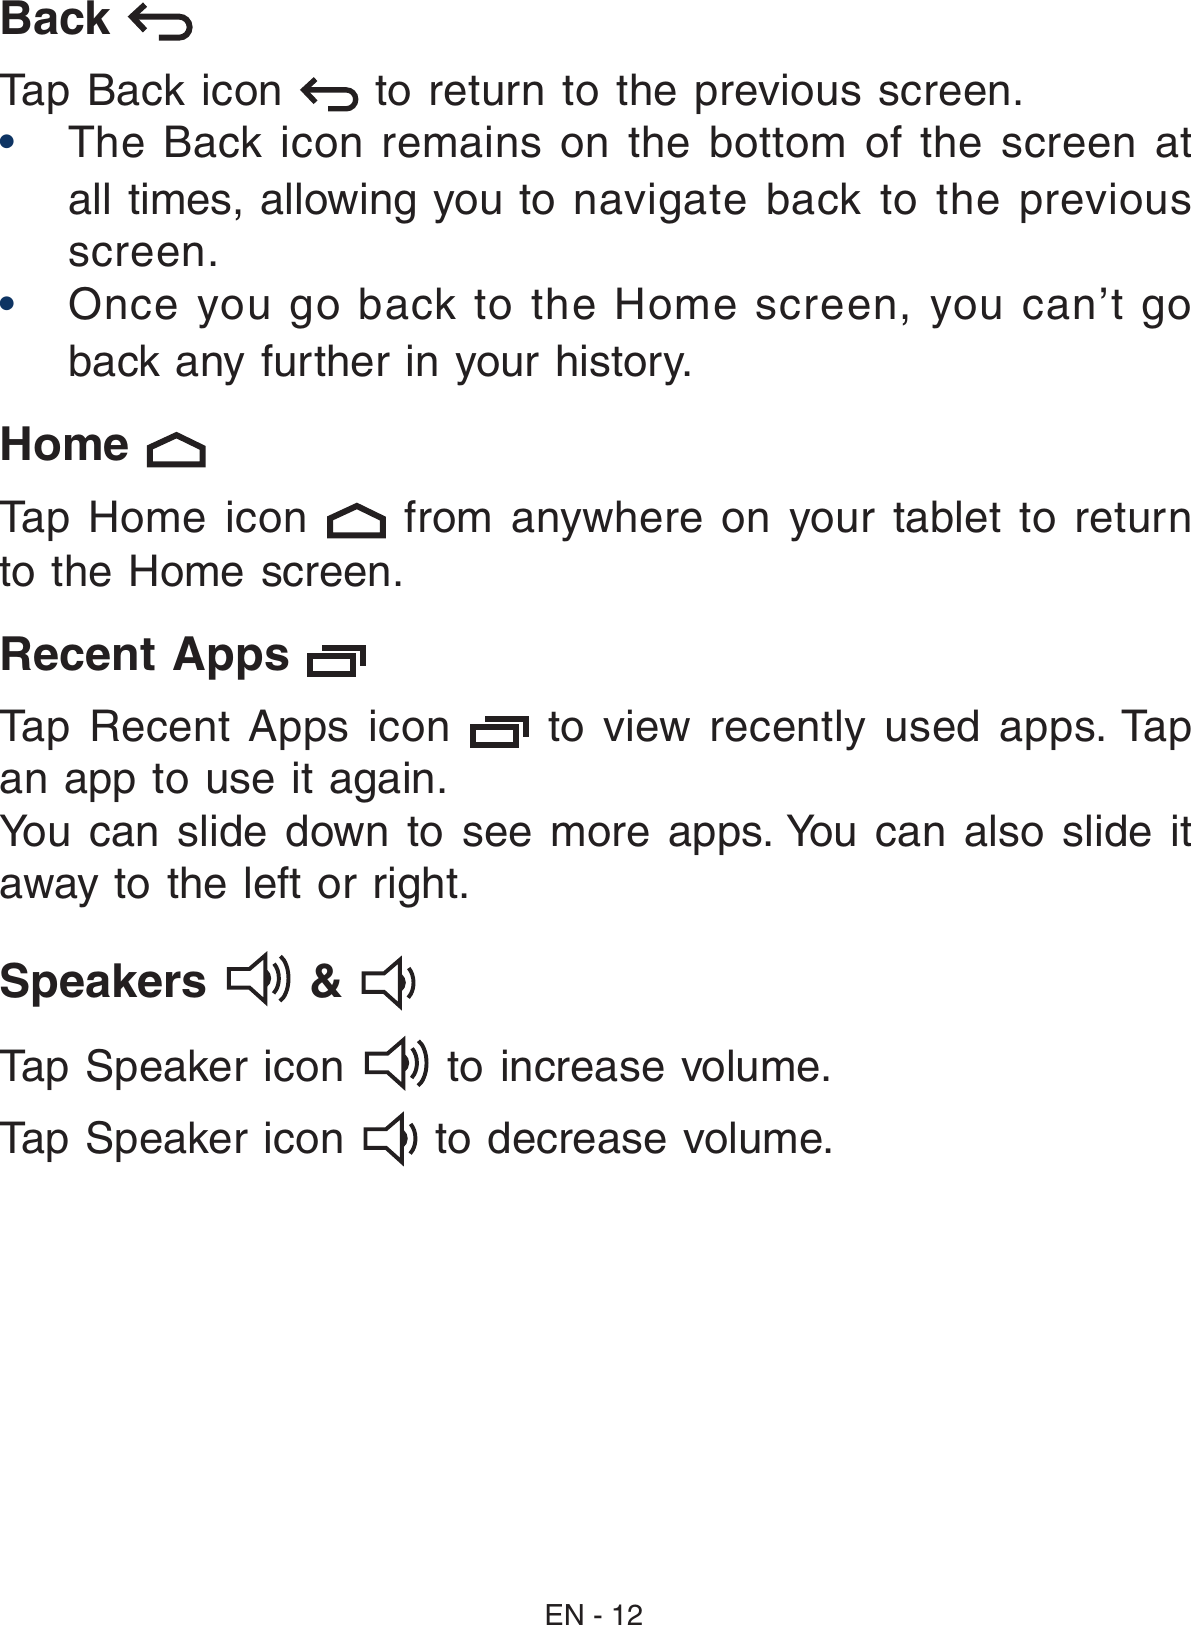 Back   Tap Back icon   to return to the previous screen.• The  Back  icon remains  on  the bottom  of  the screen  at all times, allowing you to  navigate  back  to  the  previous screen.• Once  you  go  back  to  the  Home  screen,  you  can’t  go back any further in your history.Home    Tap  Home  icon    from  anywhere  on  your  tablet  to  return to the Home screen. Recent Apps   Tap  Recent  Apps  icon    to  view  recently  used  apps. Tap an app to use it again. You  can  slide  down  to  see  more  apps. You  can  also  slide  it away to the left or right.Speakers   &amp;    Tap Speaker icon   to increase volume.Tap Speaker icon   to decrease volume.EN - 12